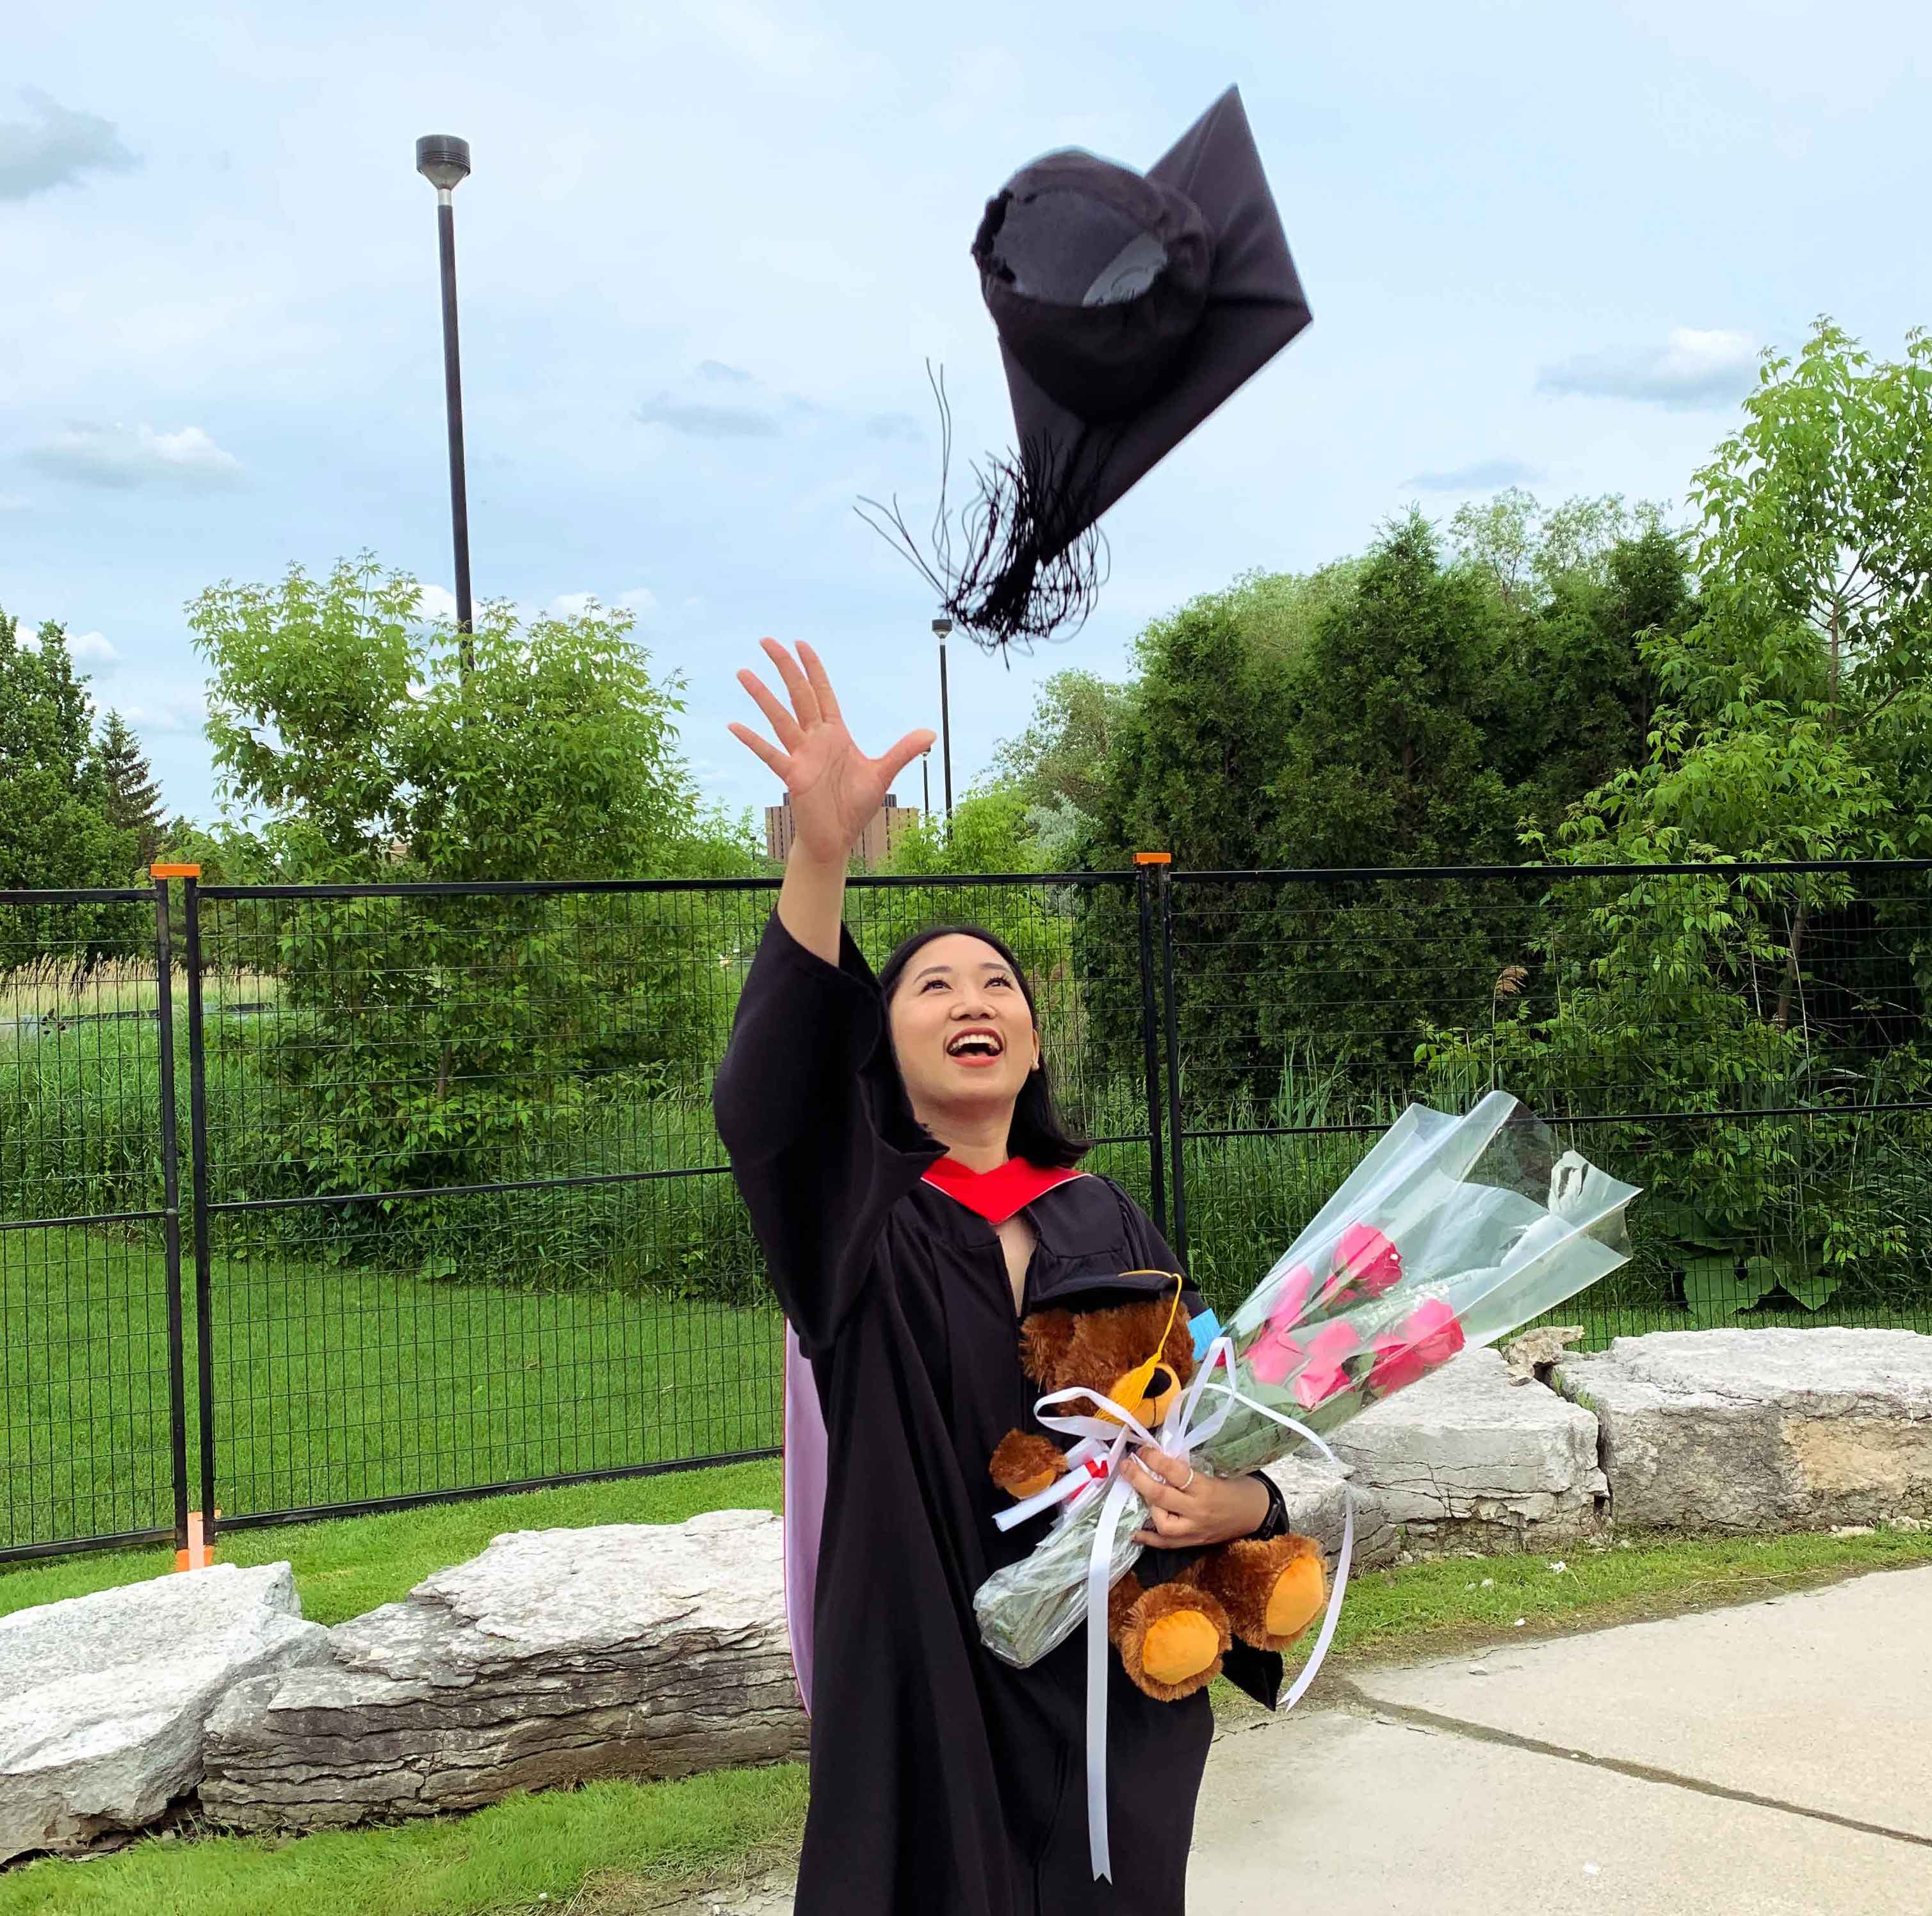 A Dahdaleh Institute intern who graduated throws her hat into the air